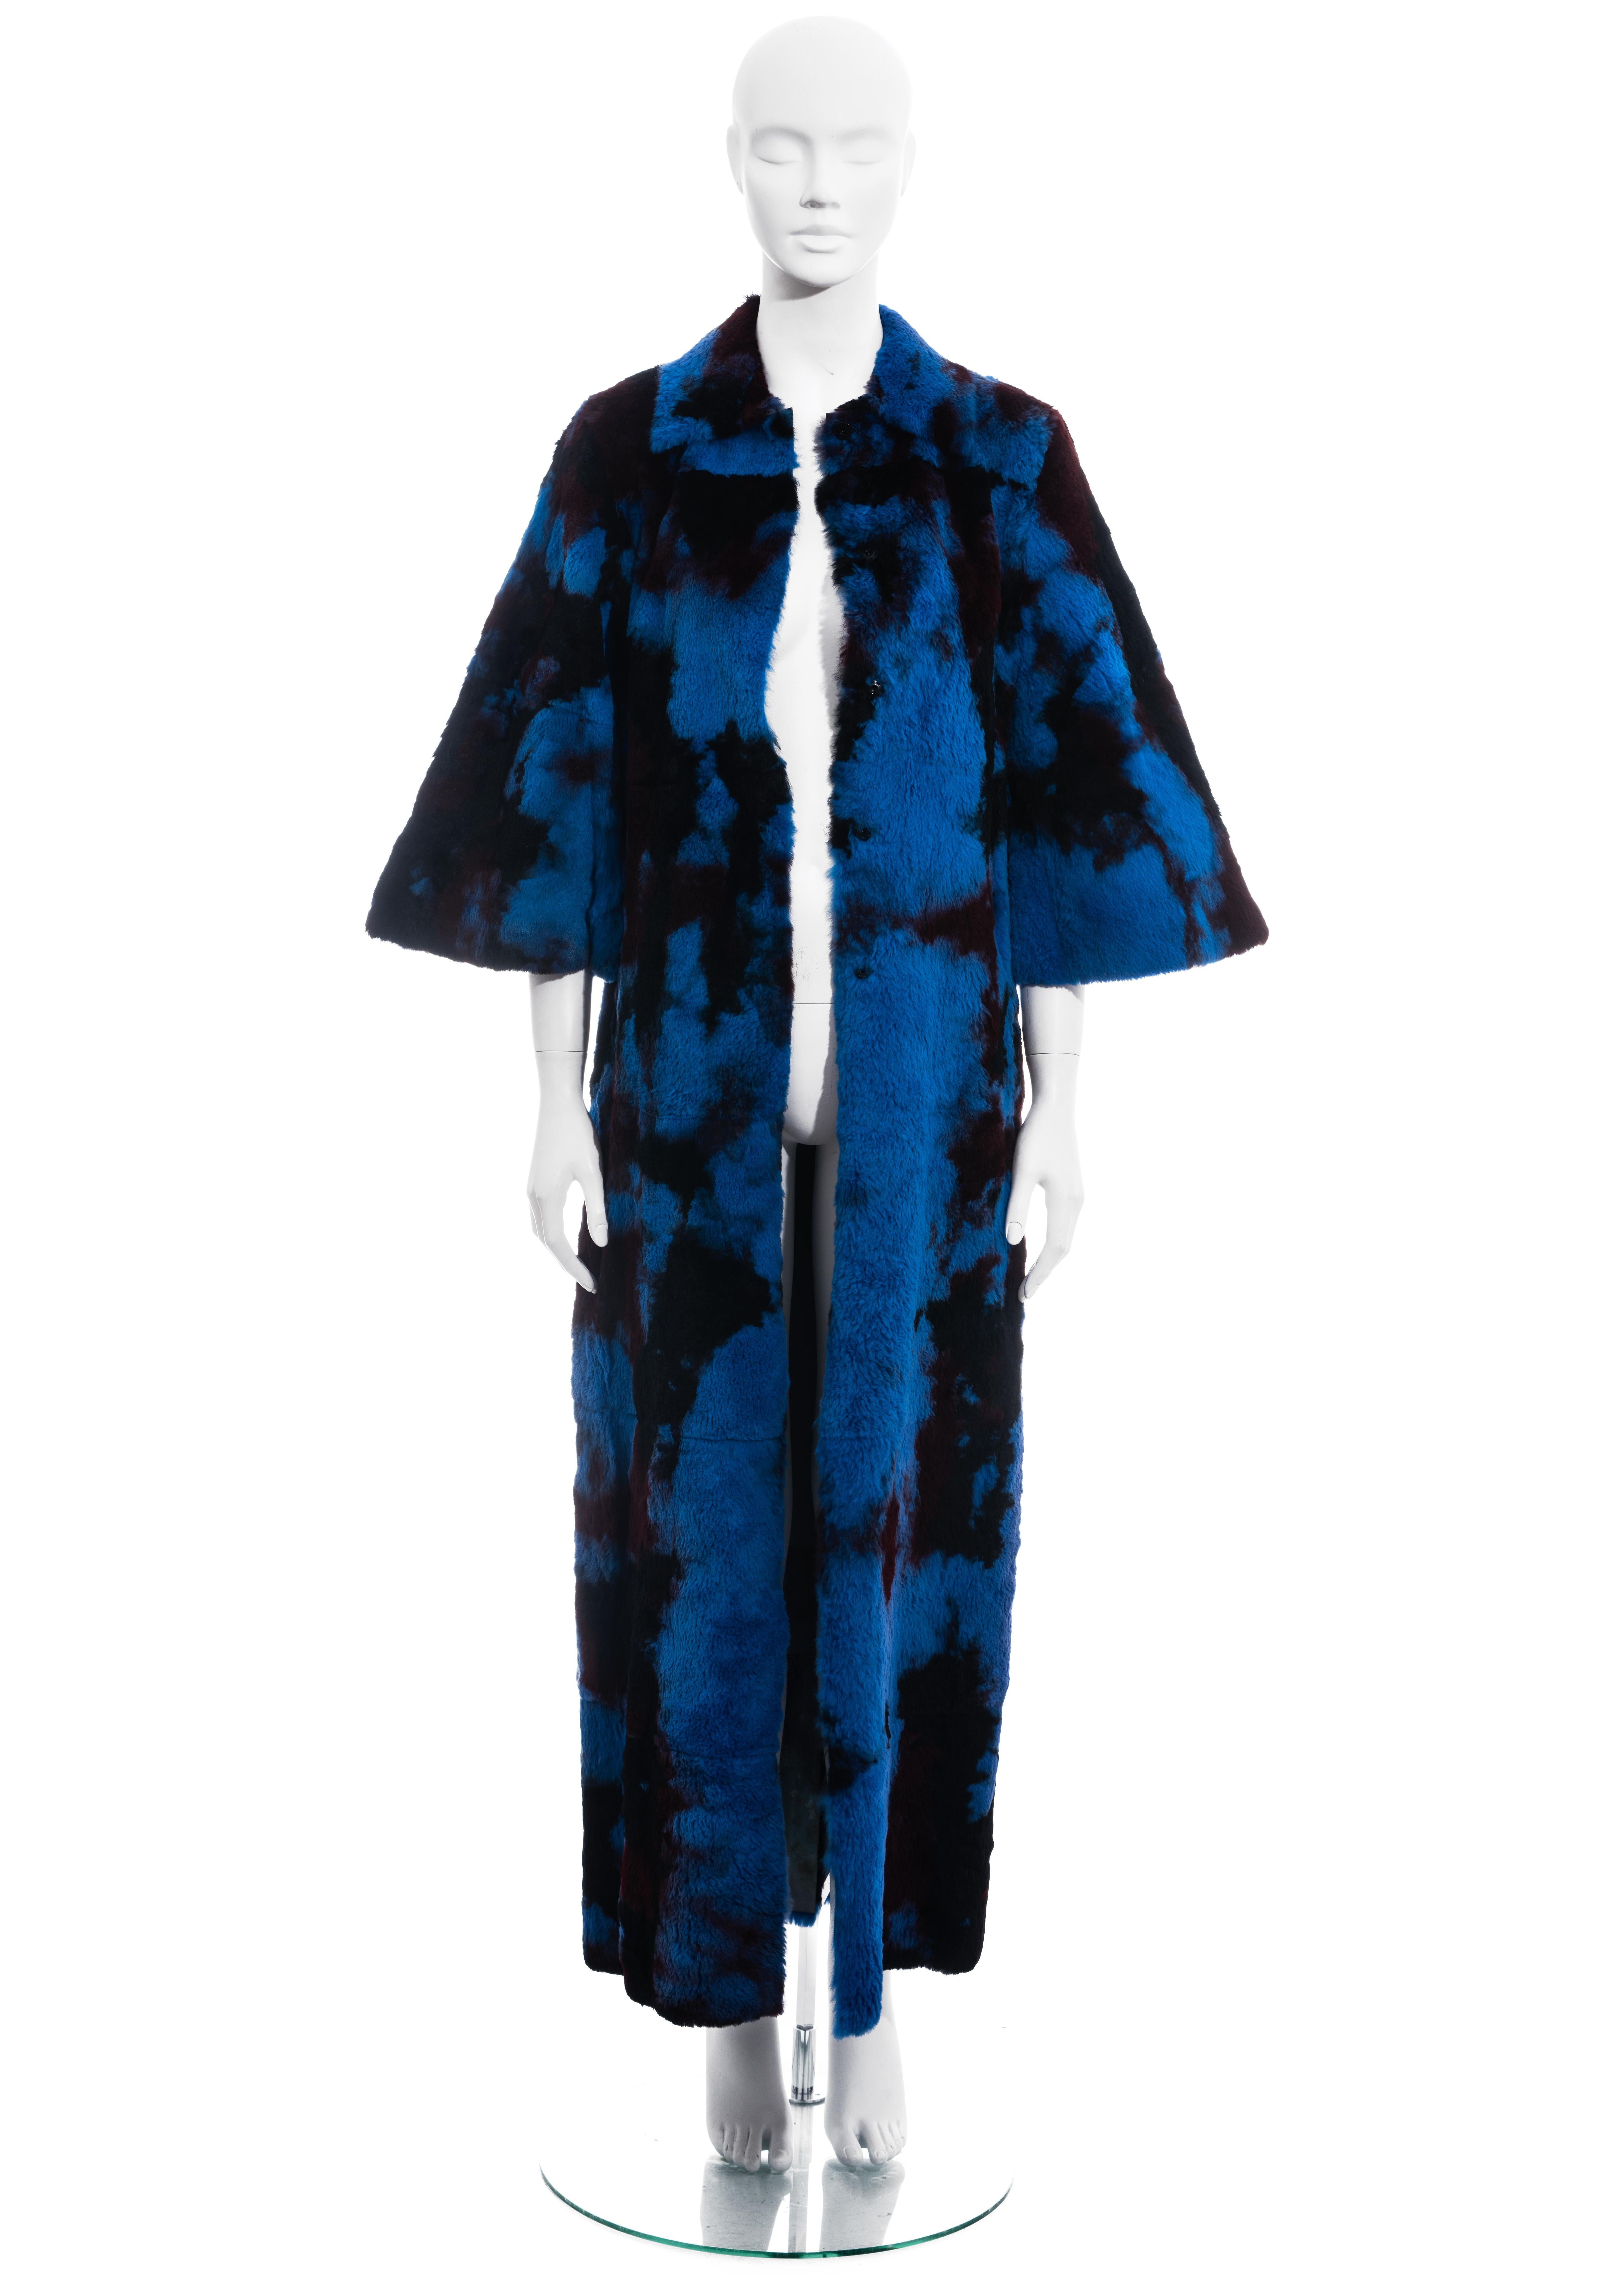 ▪ Dolce & Gabbana blue and black tie-dyed maxi coat
▪ Sheared rabbit fur 
▪ Wide cropped sleeves 
▪ Snap button closures 
▪ IT 40 - FR 36 - UK 8 - US 4
▪ Fall-Winter 1999

